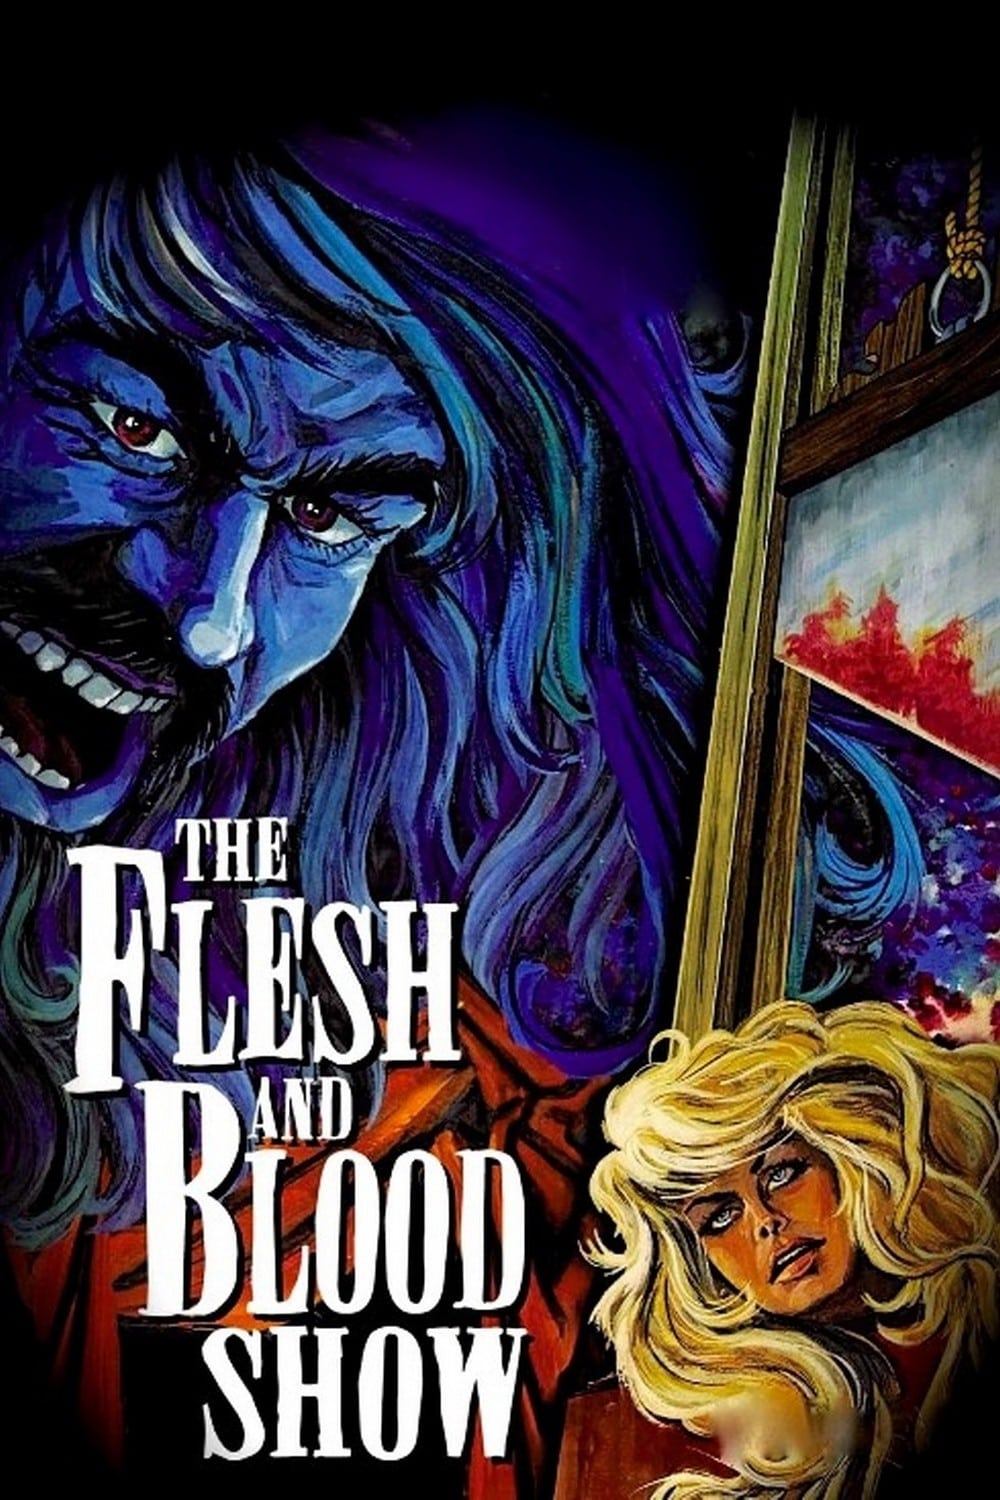 The Flesh and Blood Show film